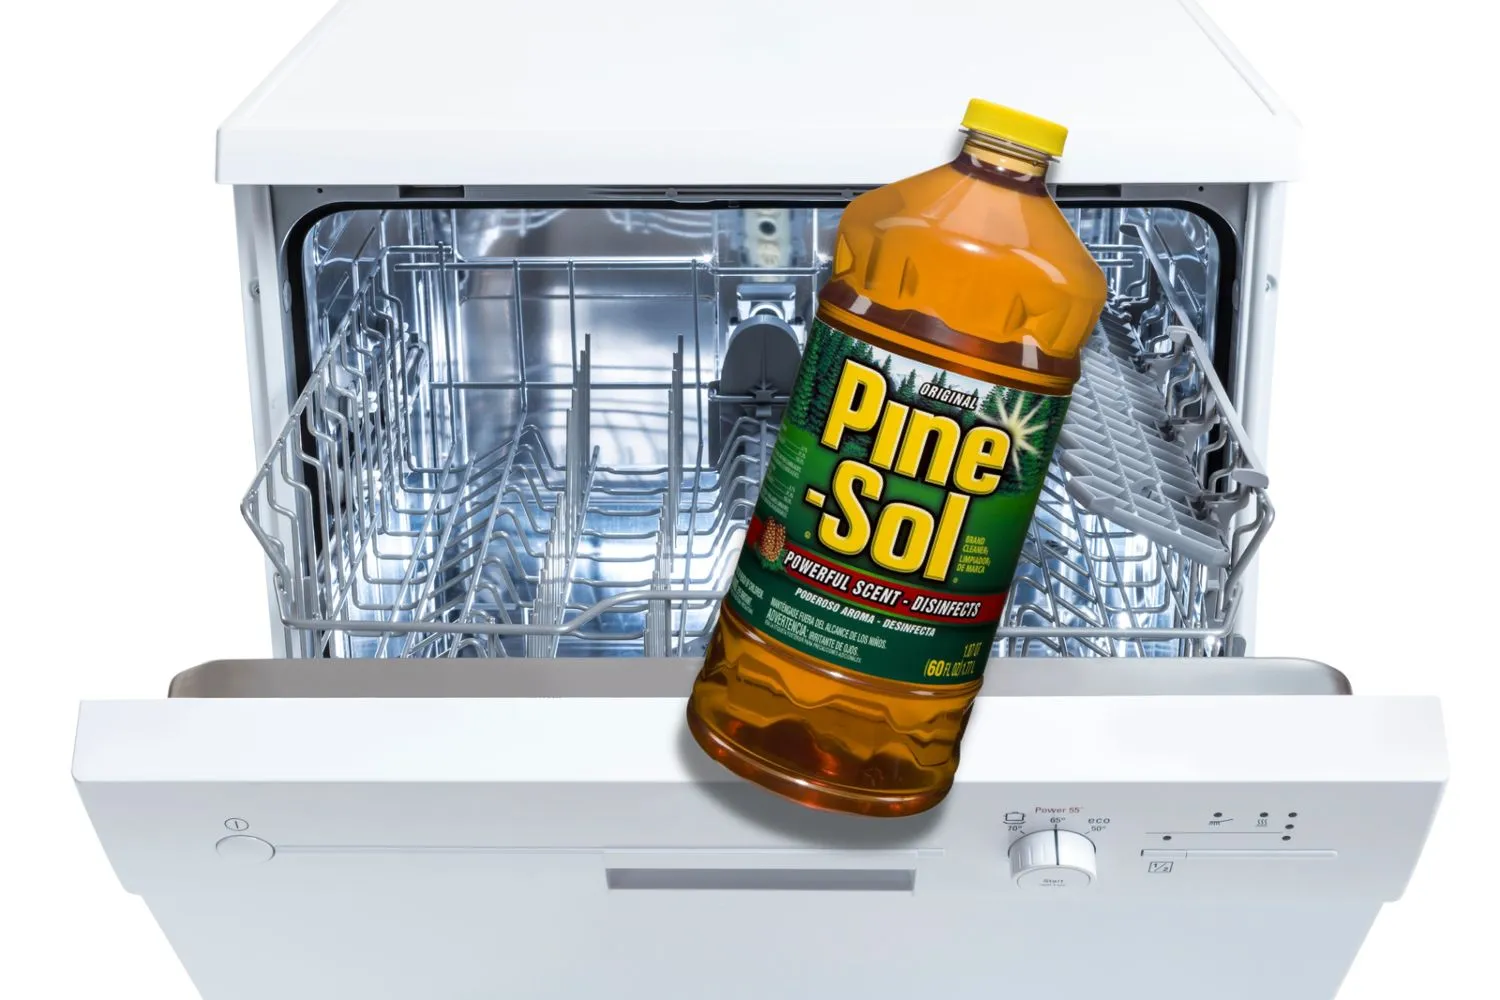 Can You Use Pine-Sol In The Dishwasher?